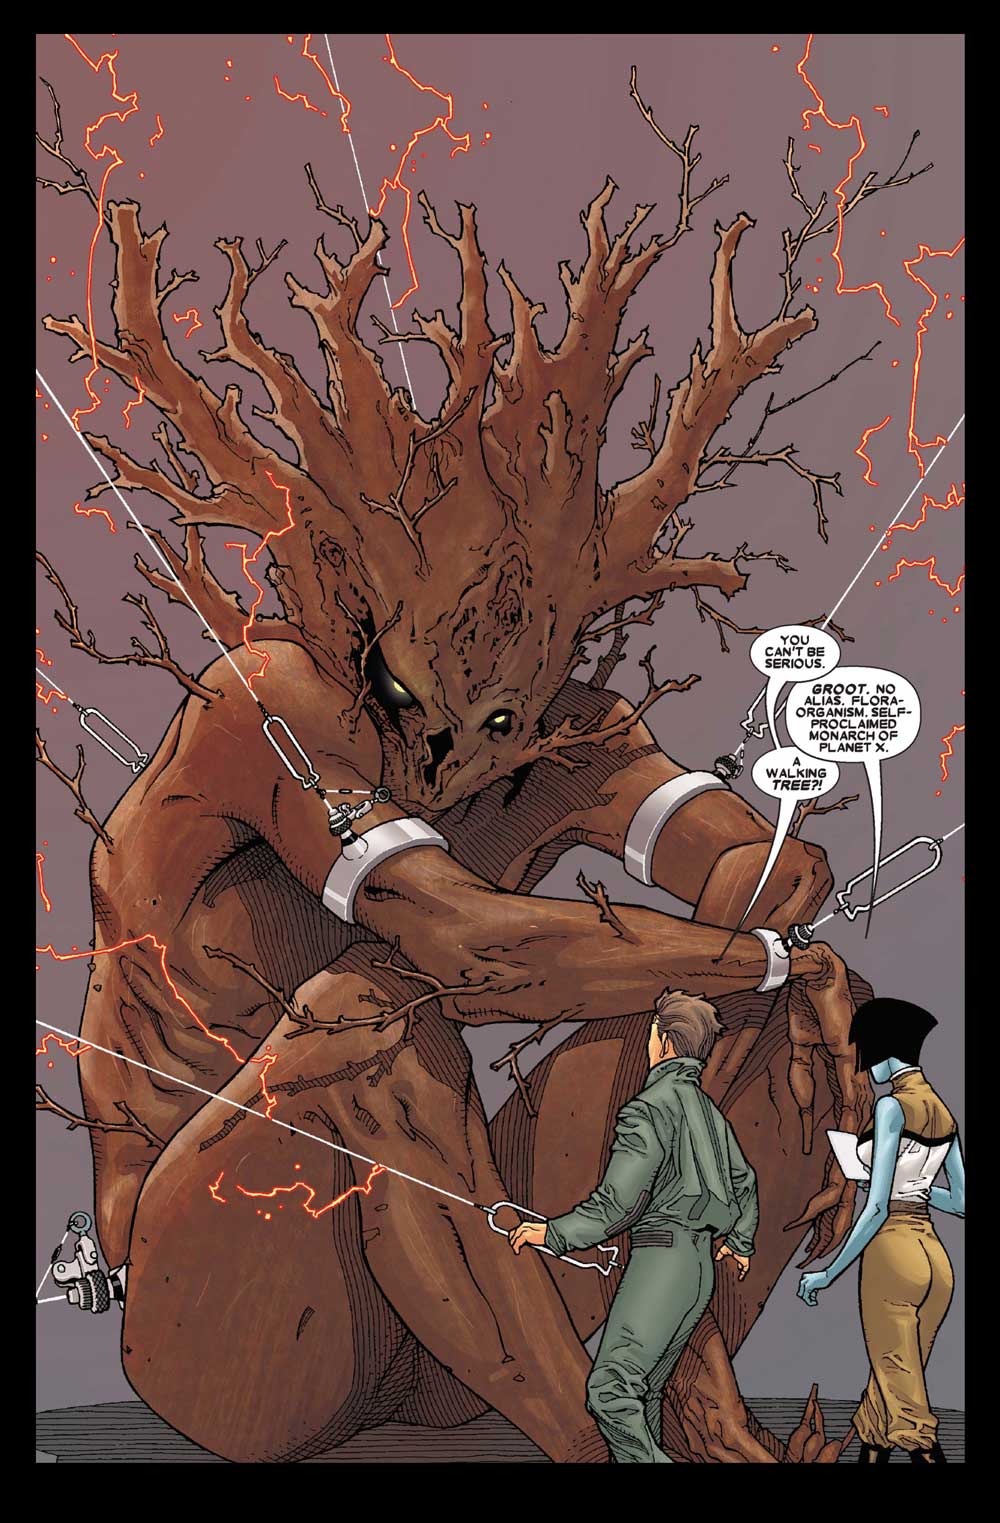 Starlord meets Groot